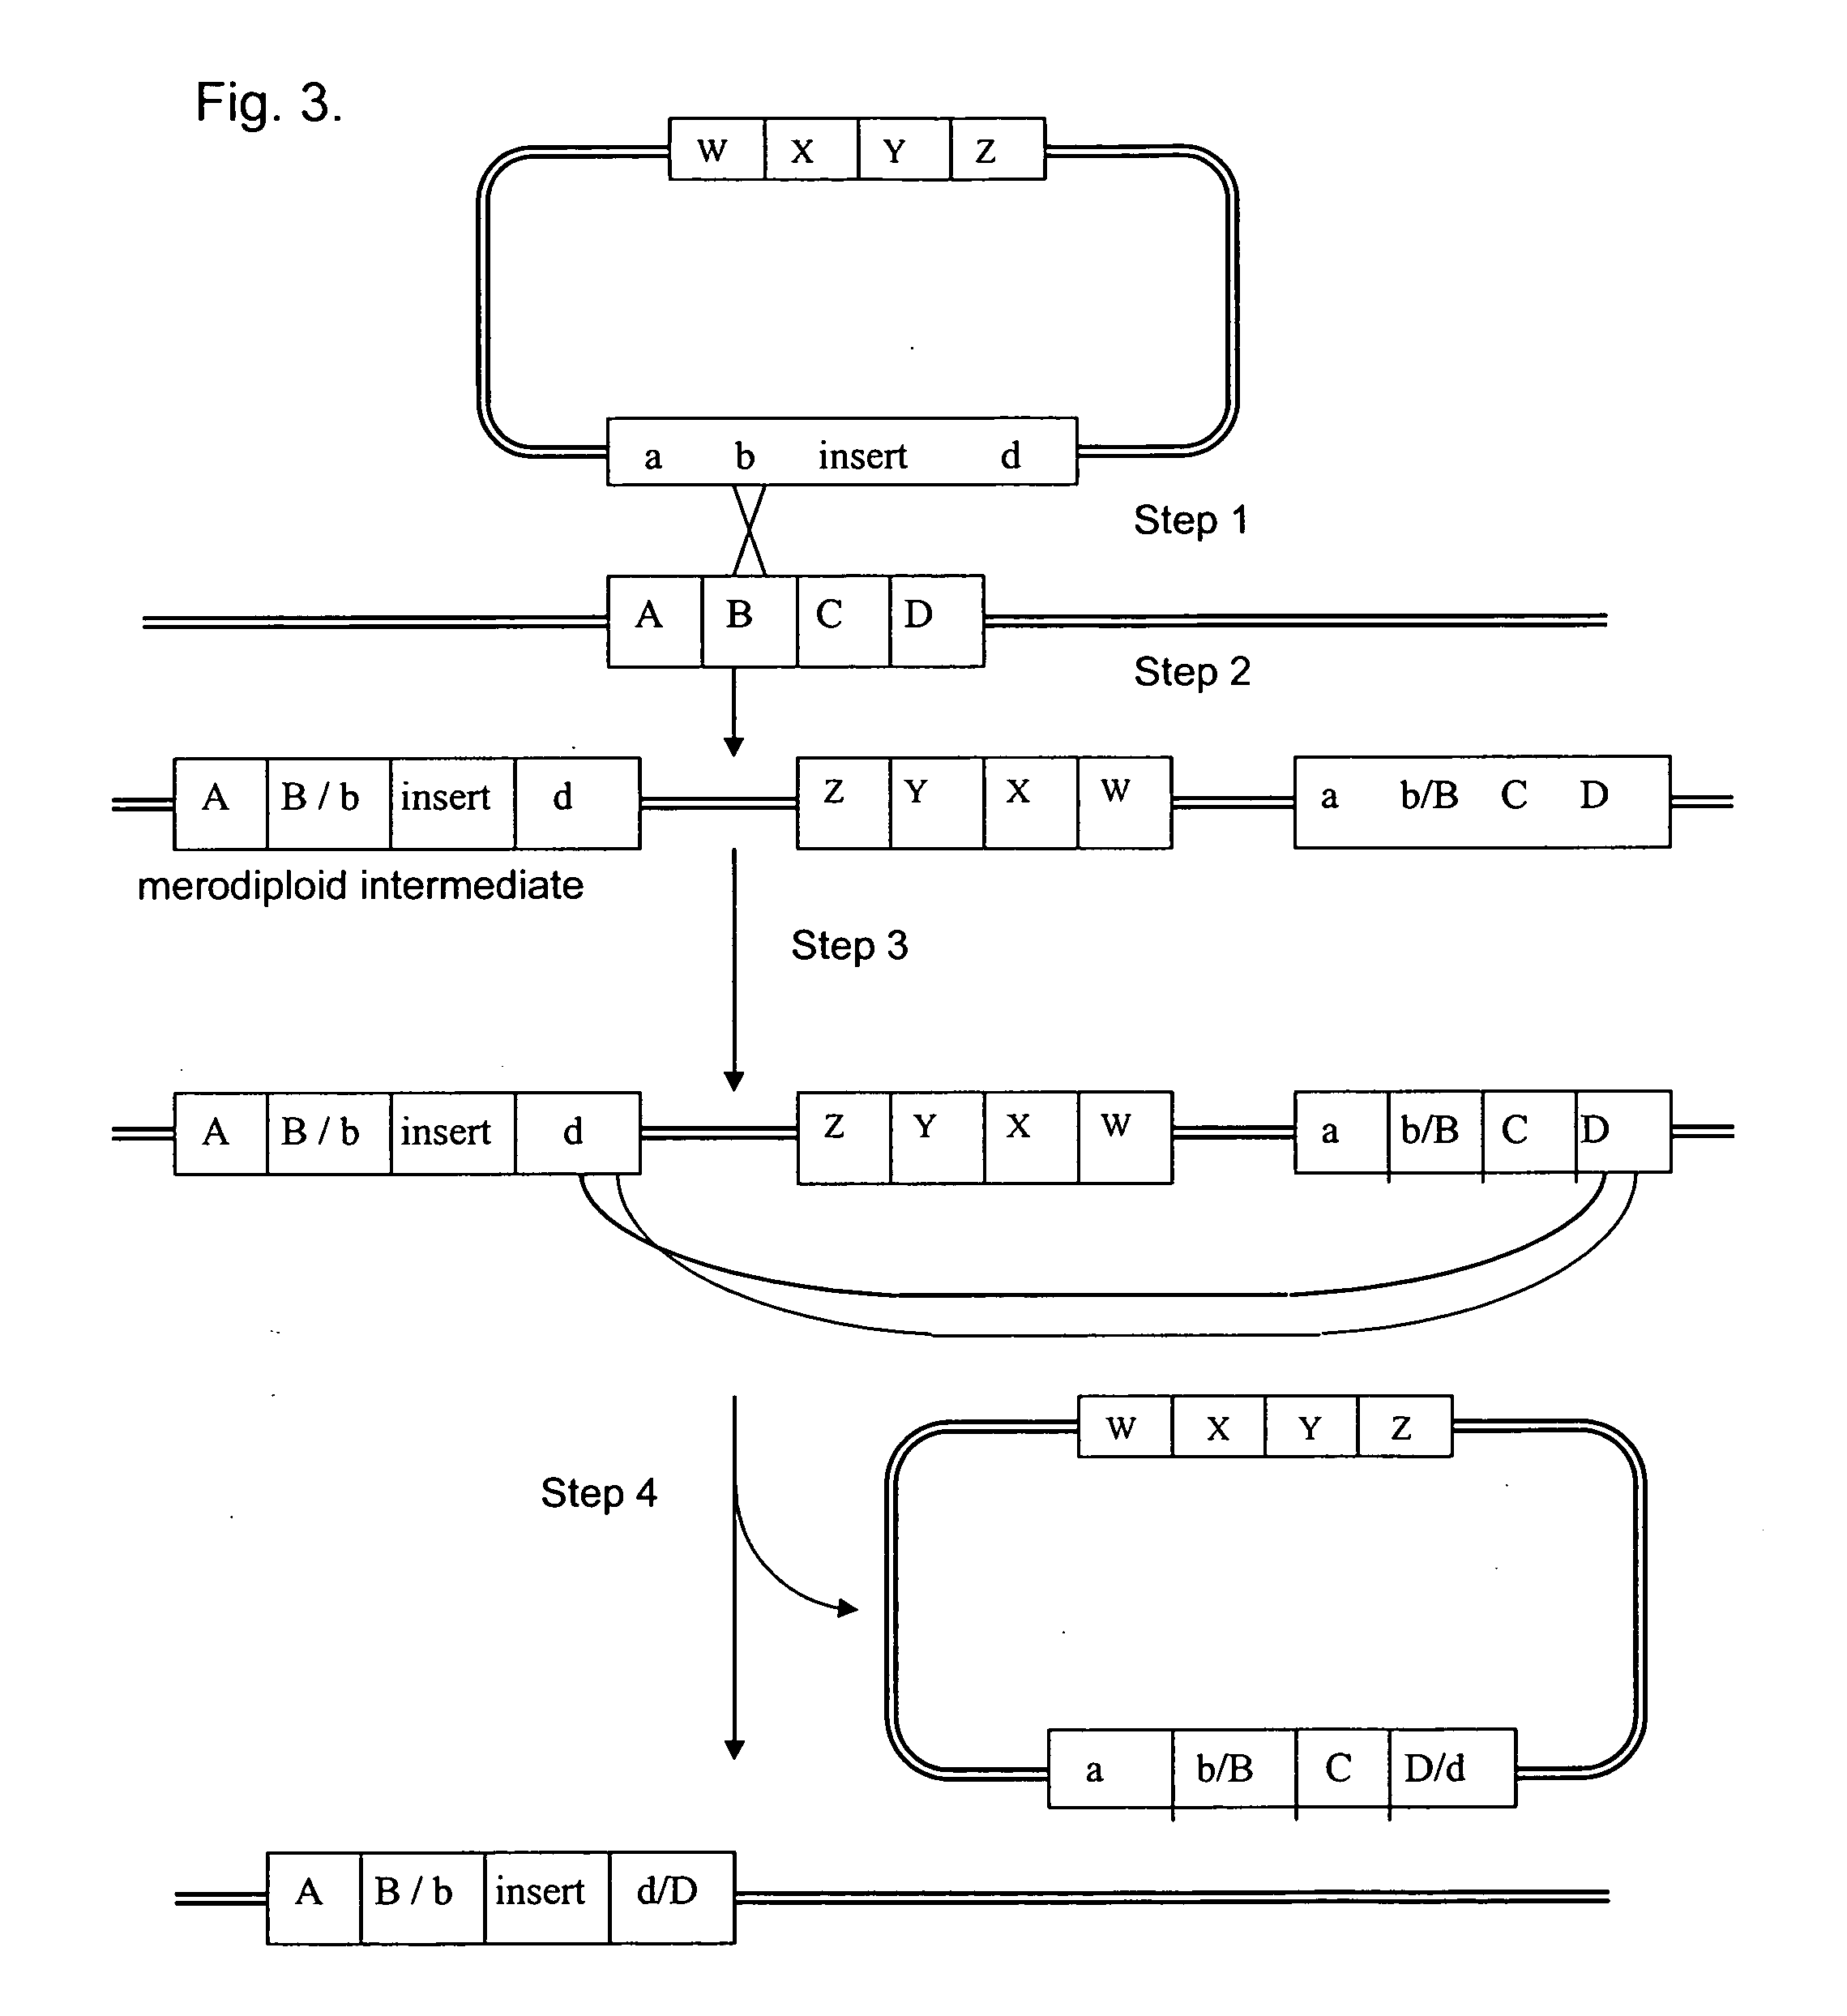 Engineered Listeria and methods of use thereof